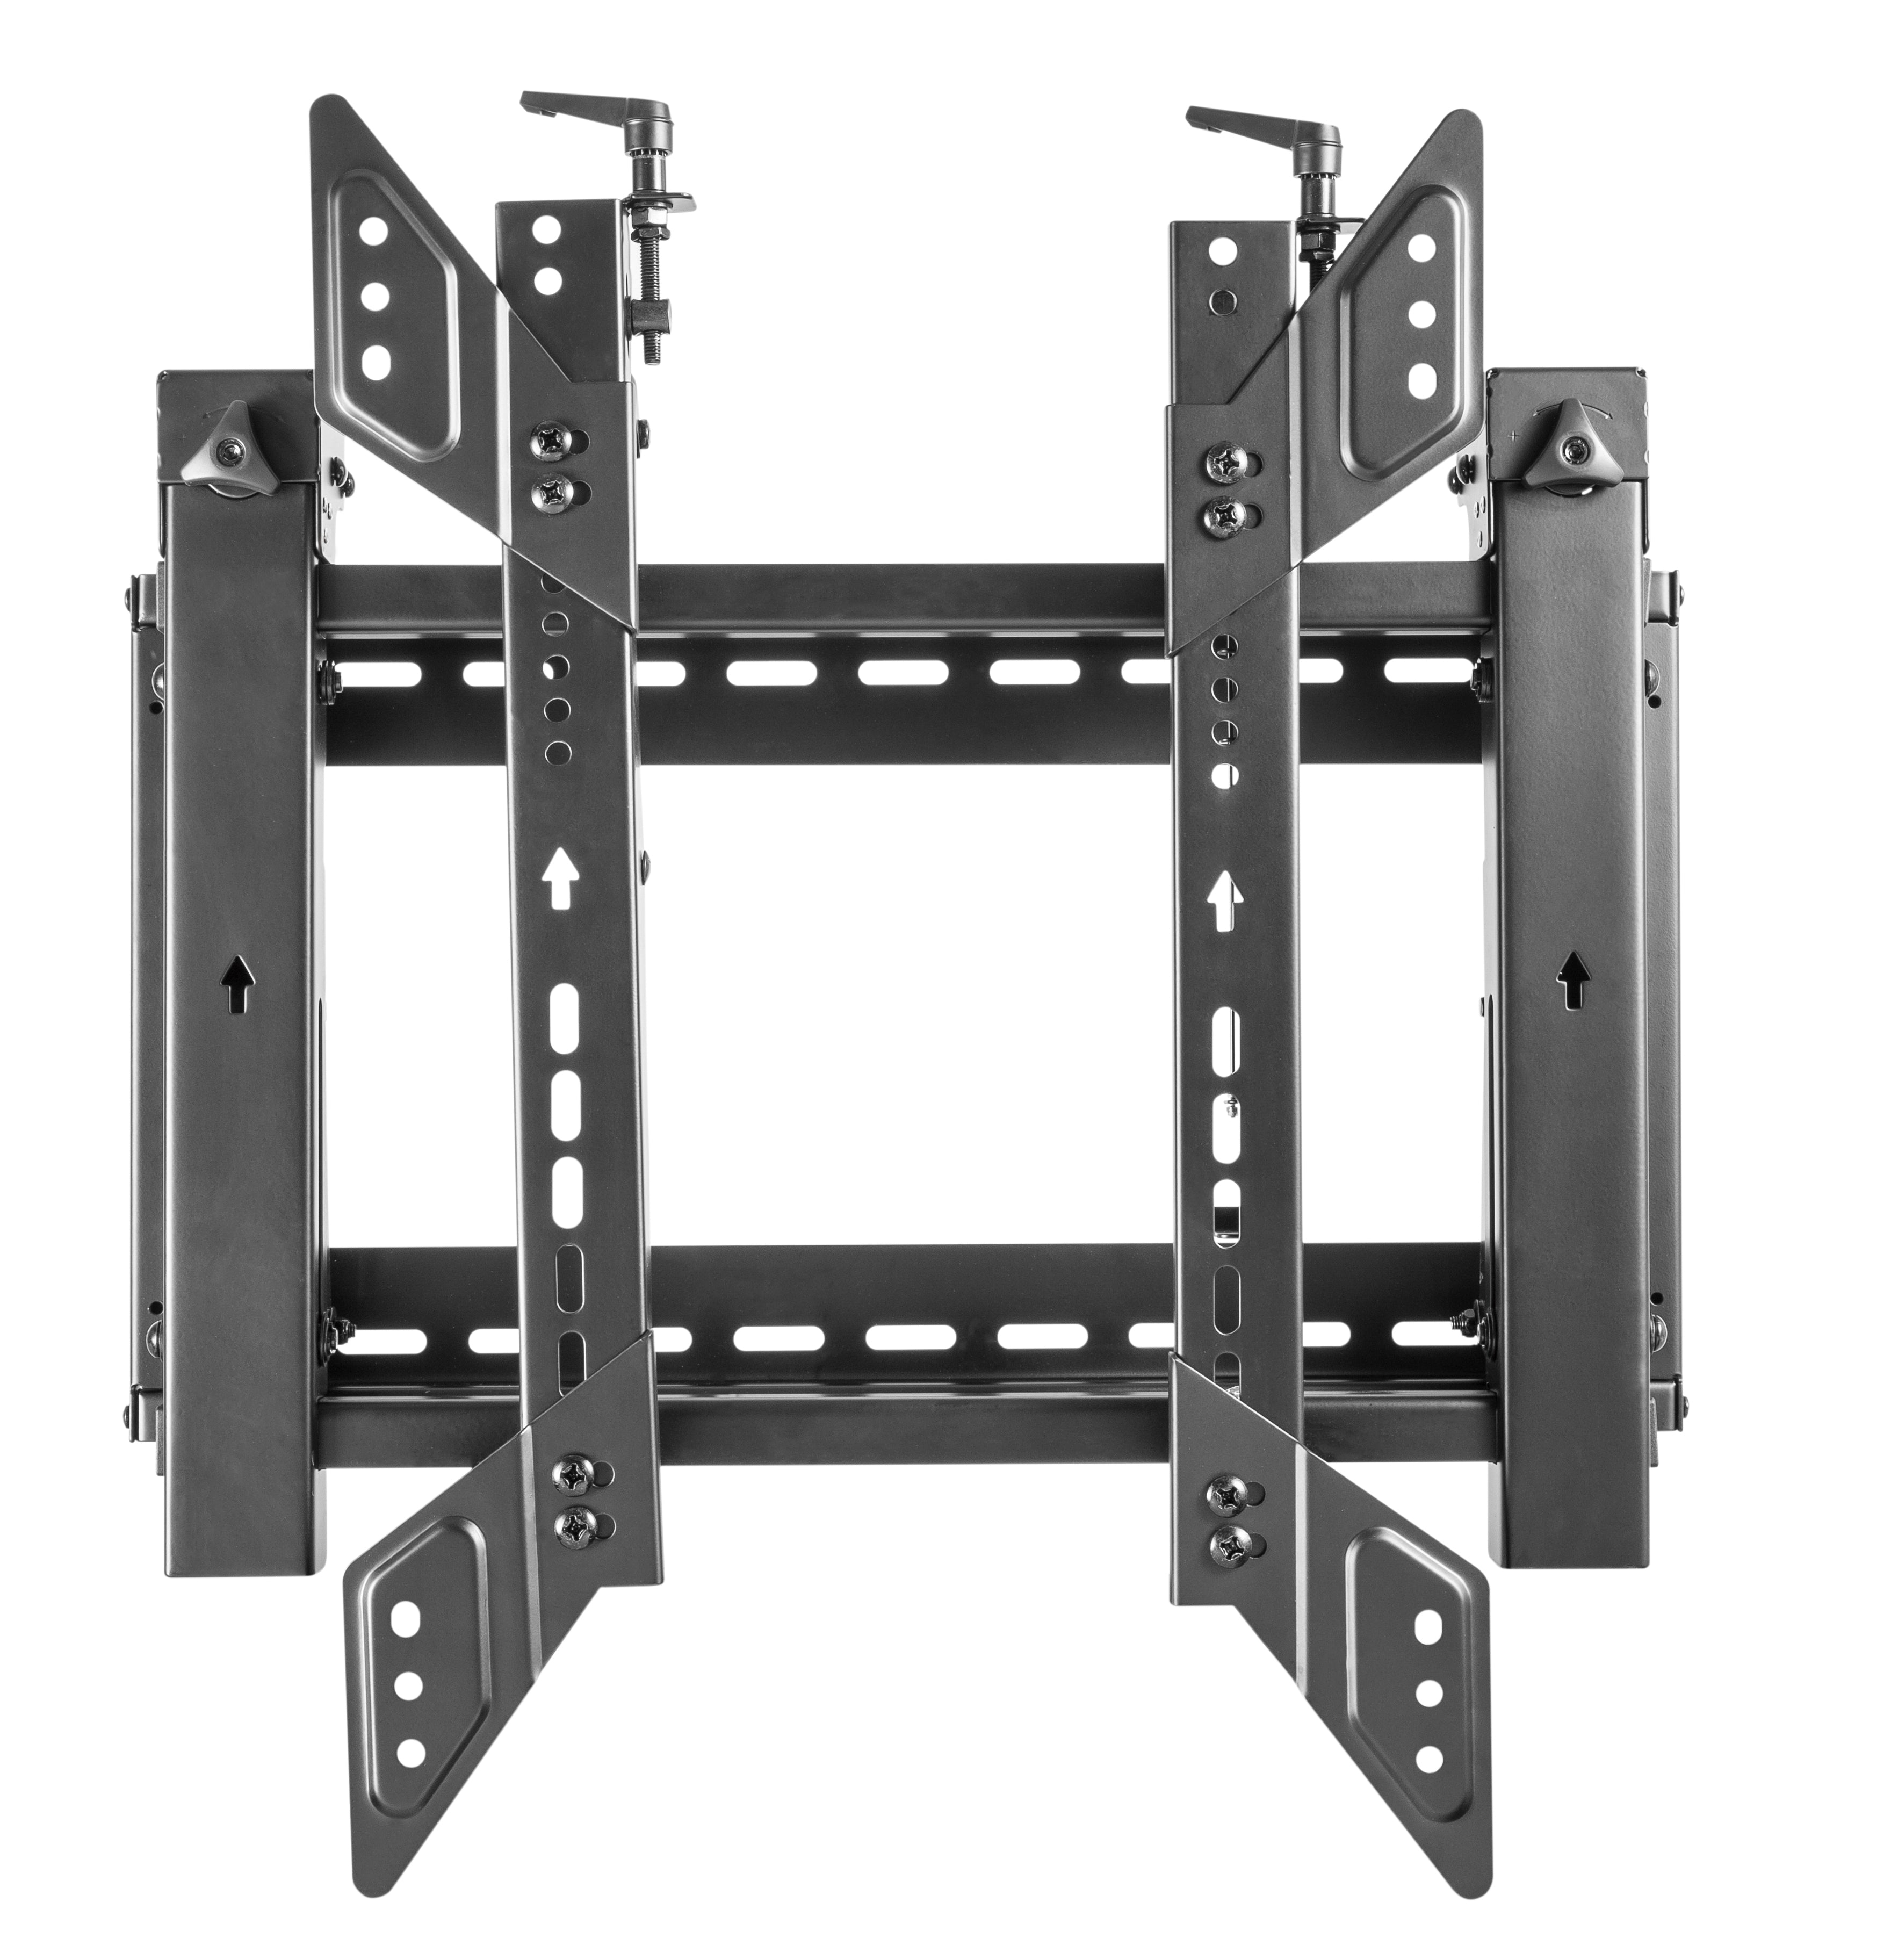 Portrait Oriented Push-In, Pop-Out Video Wall Mount